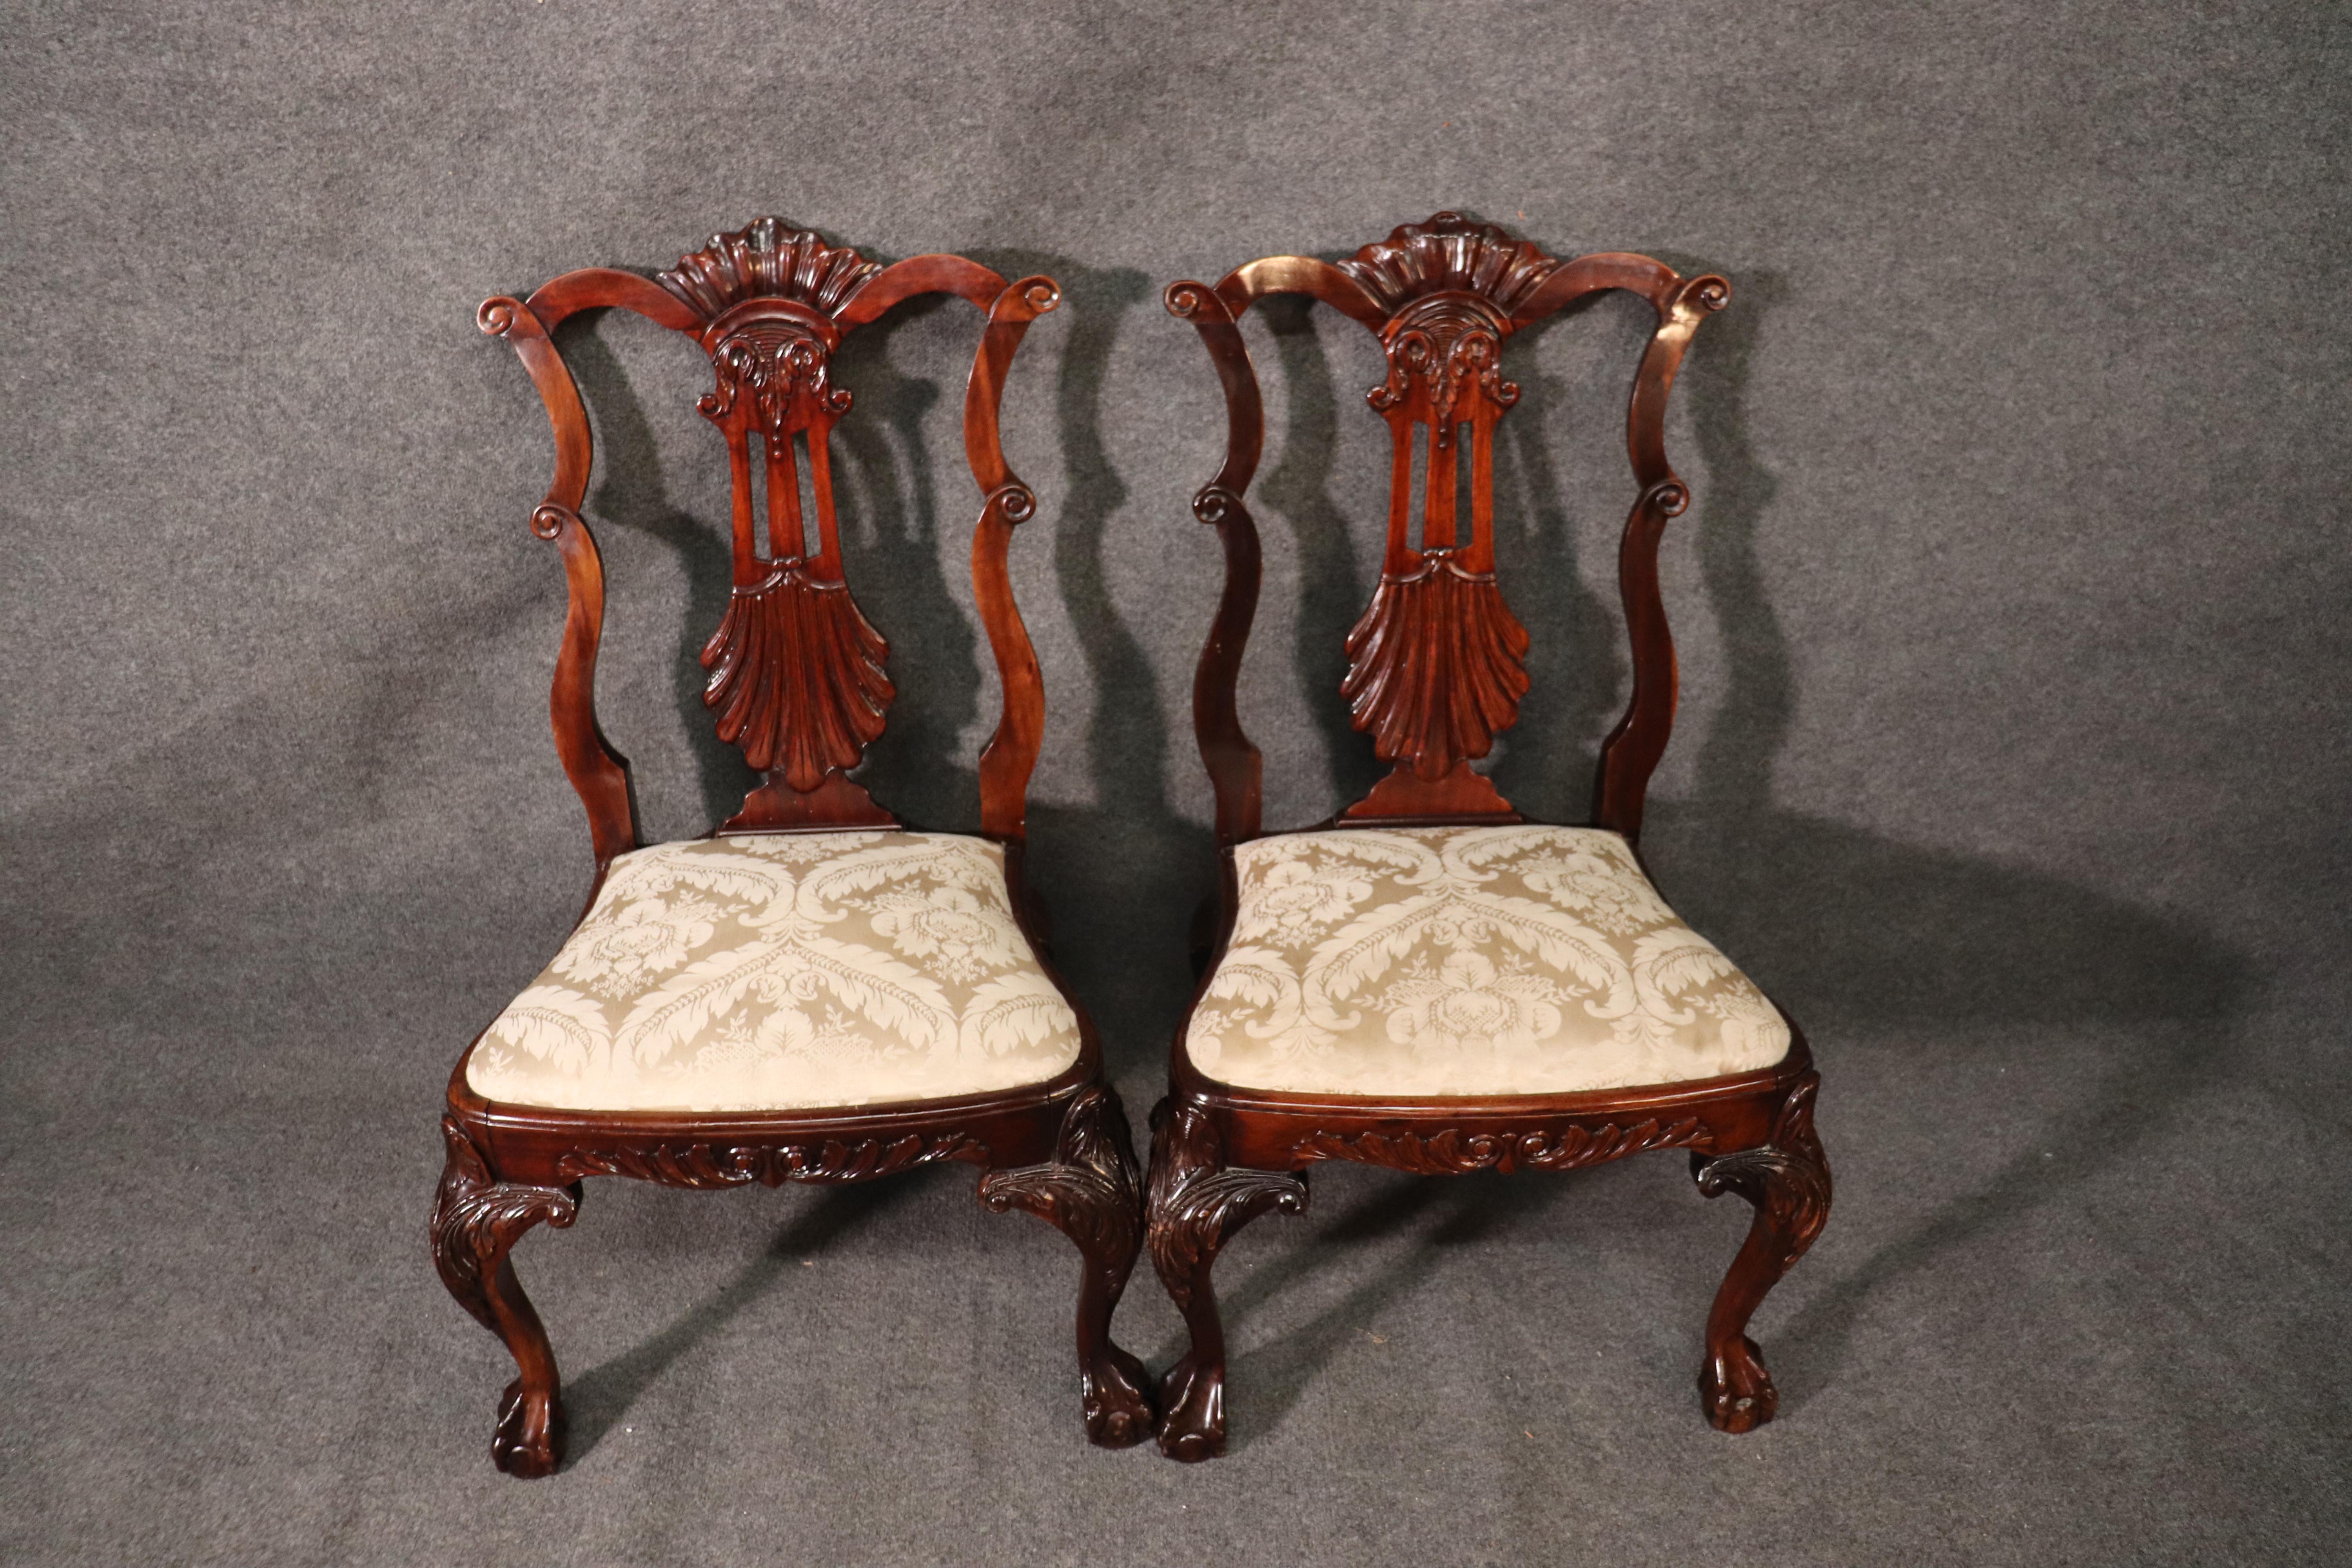 These gorgeous chairs feature a unique design that we have never seen before. The chairs are made of solid mahogany and mortice and Tenon construction with pinned joints. The chairs date to the early 1900s and just beautiful. The chairs measure: 41